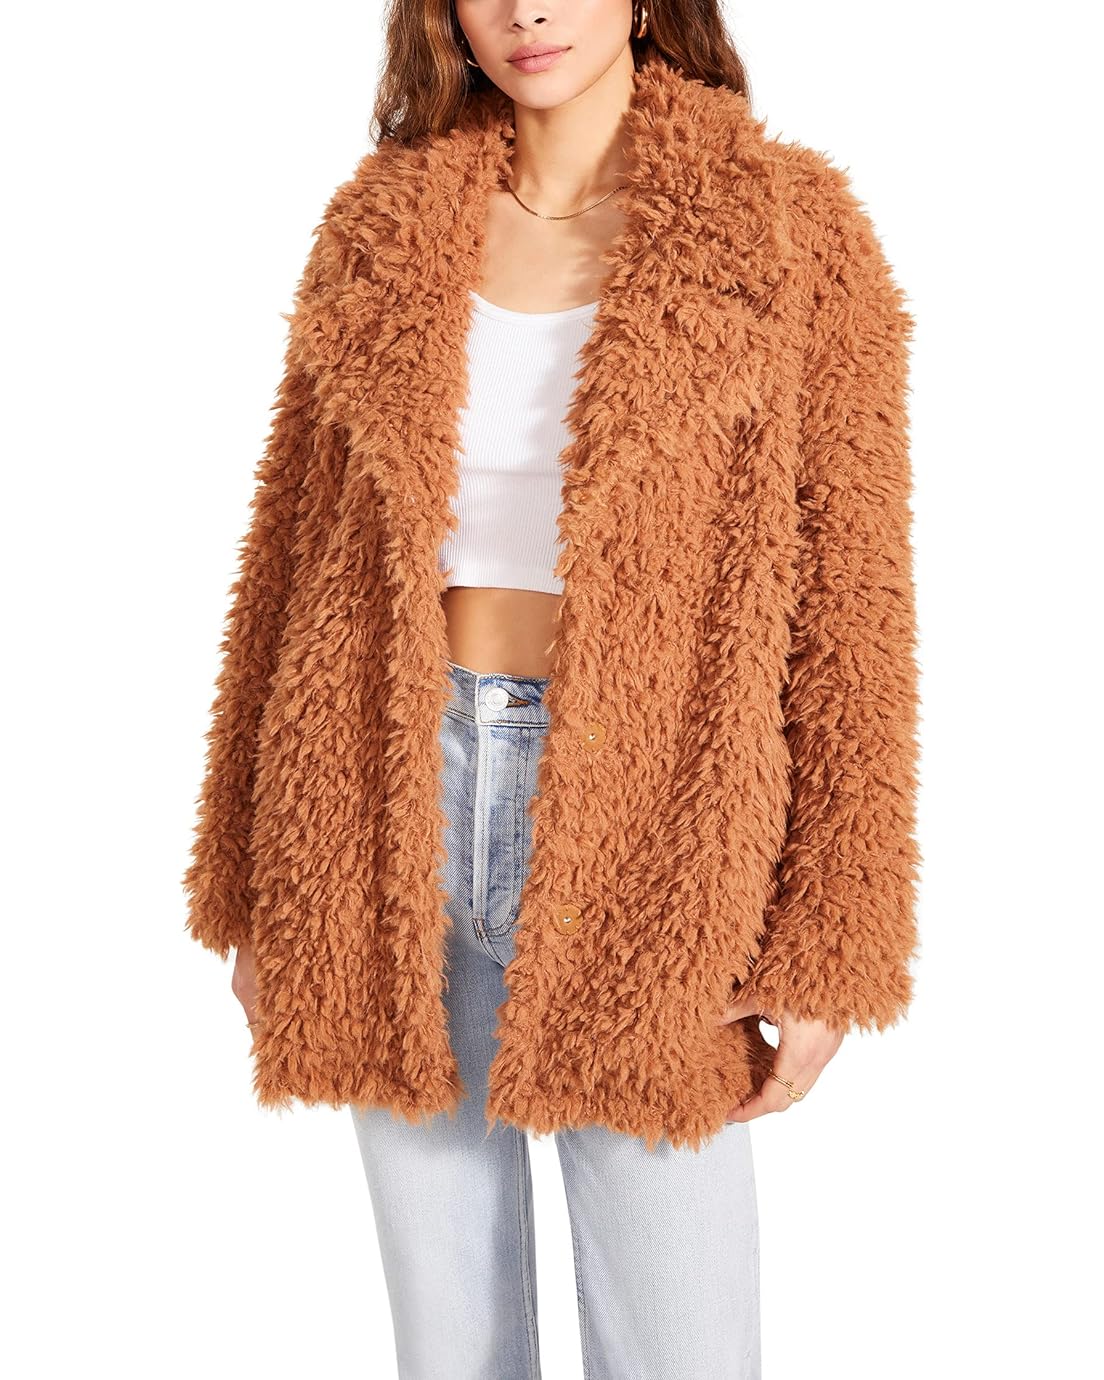 Steve Madden Whats The Fuzz About Coat